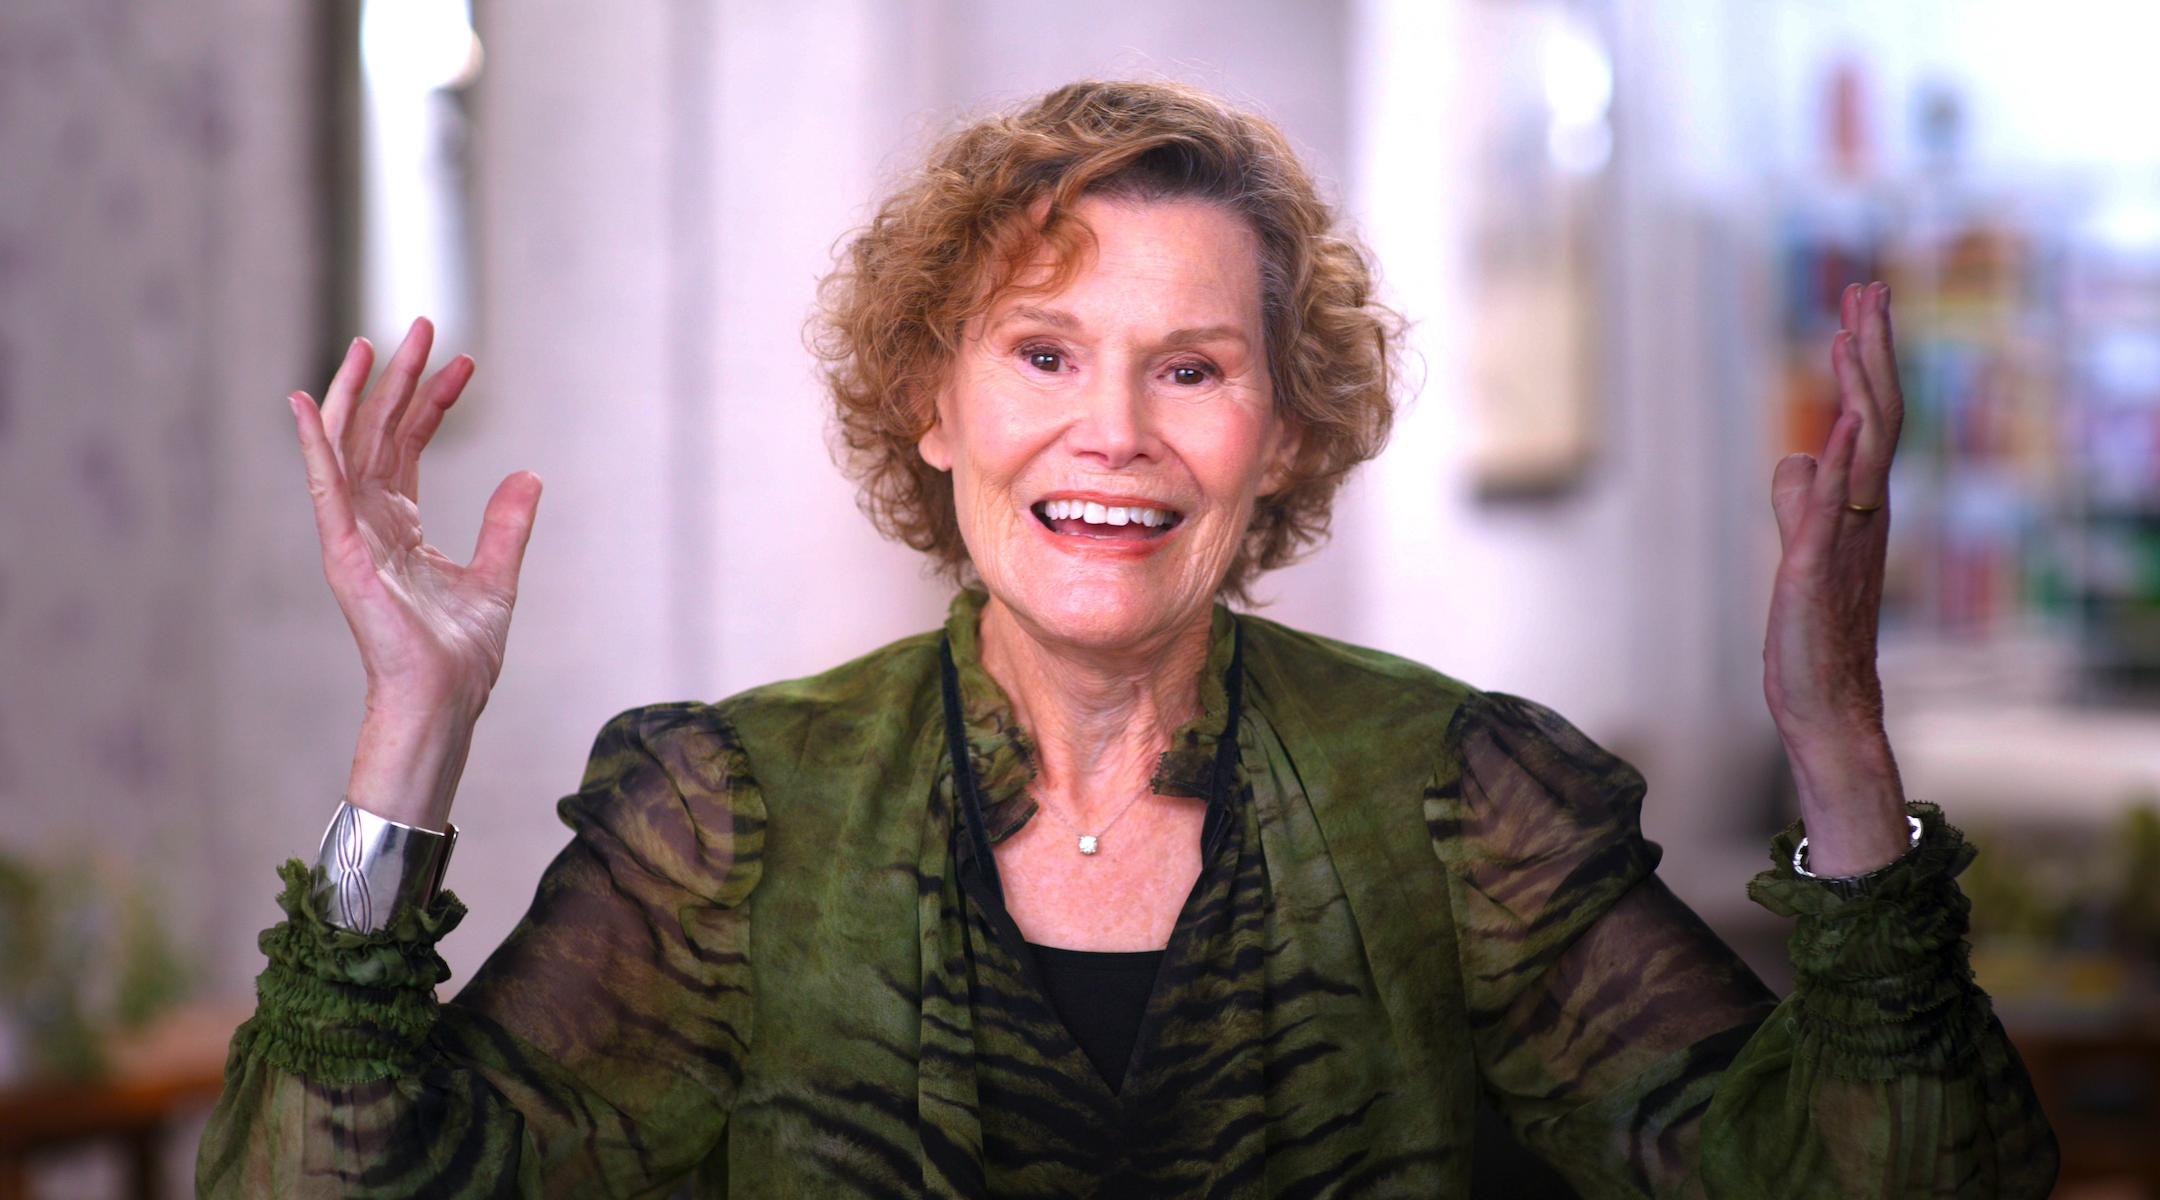 Judy Blume seen in the documentary “Judy Blume Forever.” (Courtesy of Prime Video)